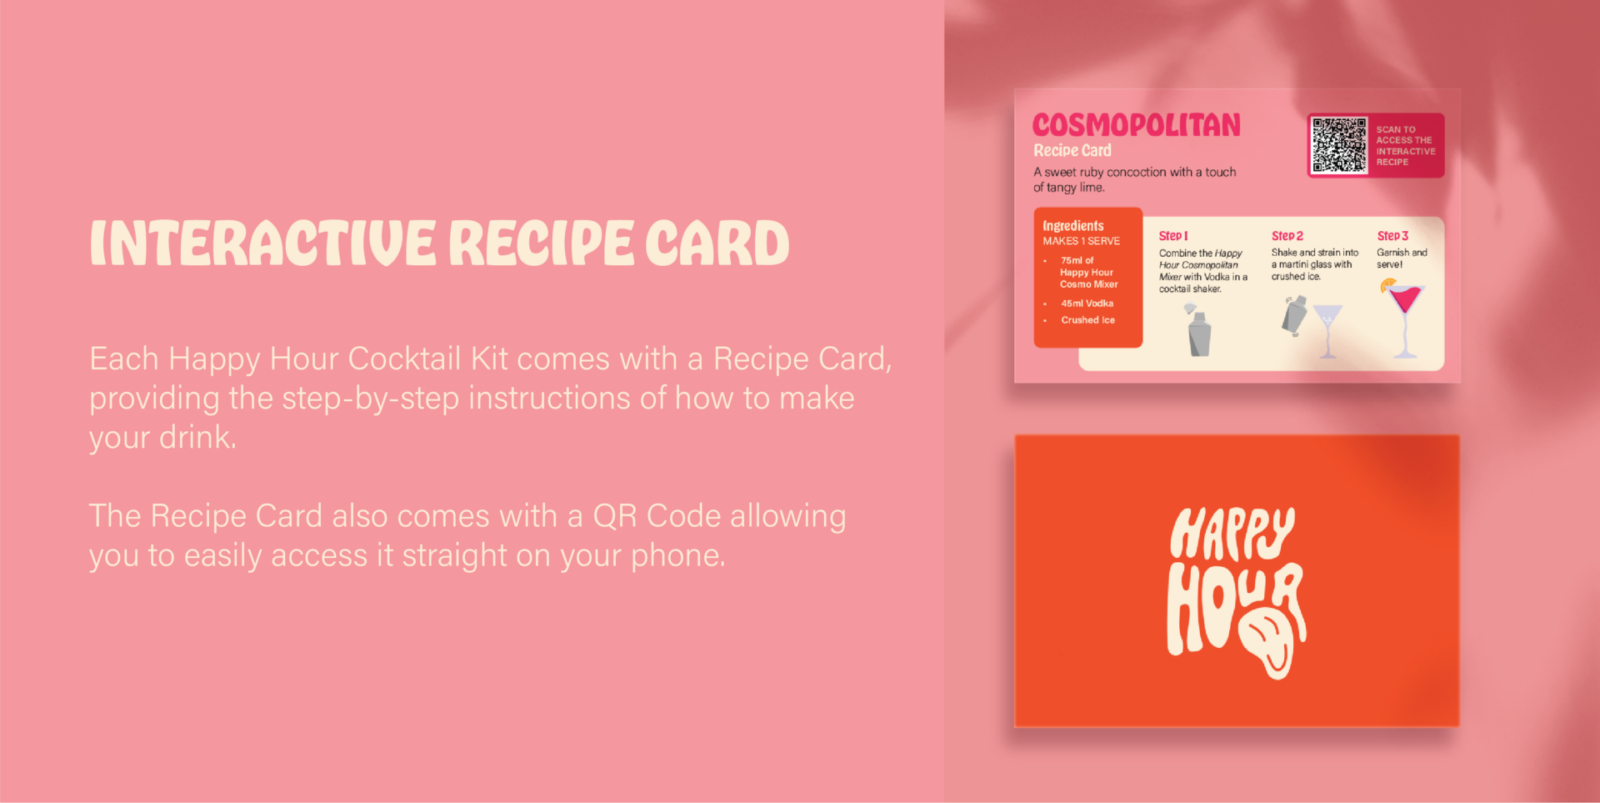 Interactive Recipe Card Description:
Each Happy Hour Cocktail kit comes with a Recipe Card, providing the step-by-step instructions of how to make your drink.
The Recipe Card also comes with a QR code allowing you to easily access it straight on your phone.
